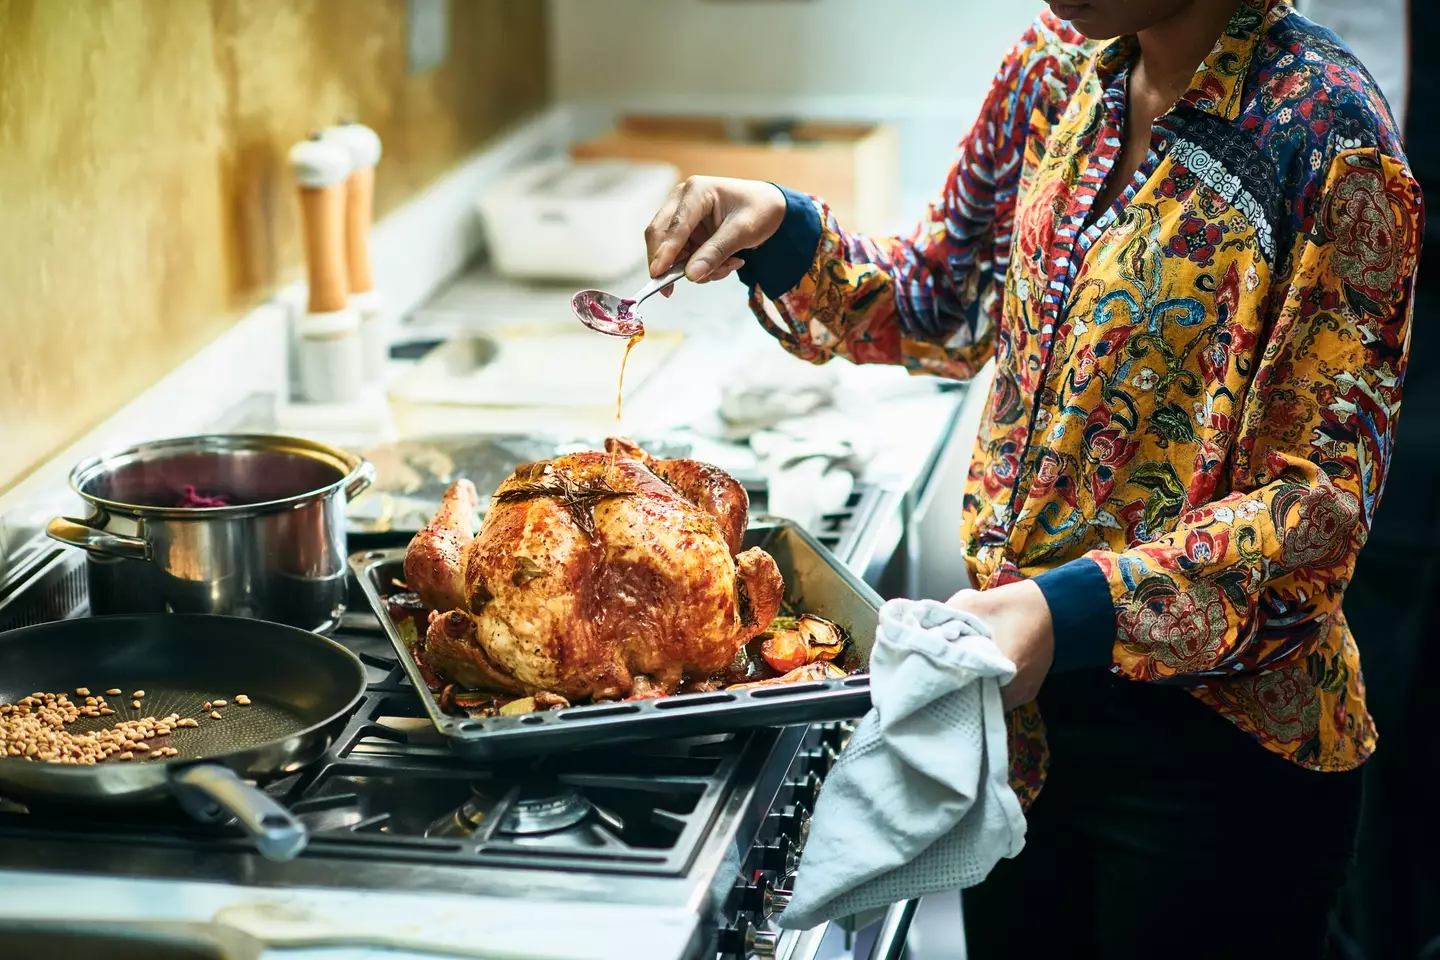 But health experts warn that cooking your turkey with stuffing inside can cause serious issues.